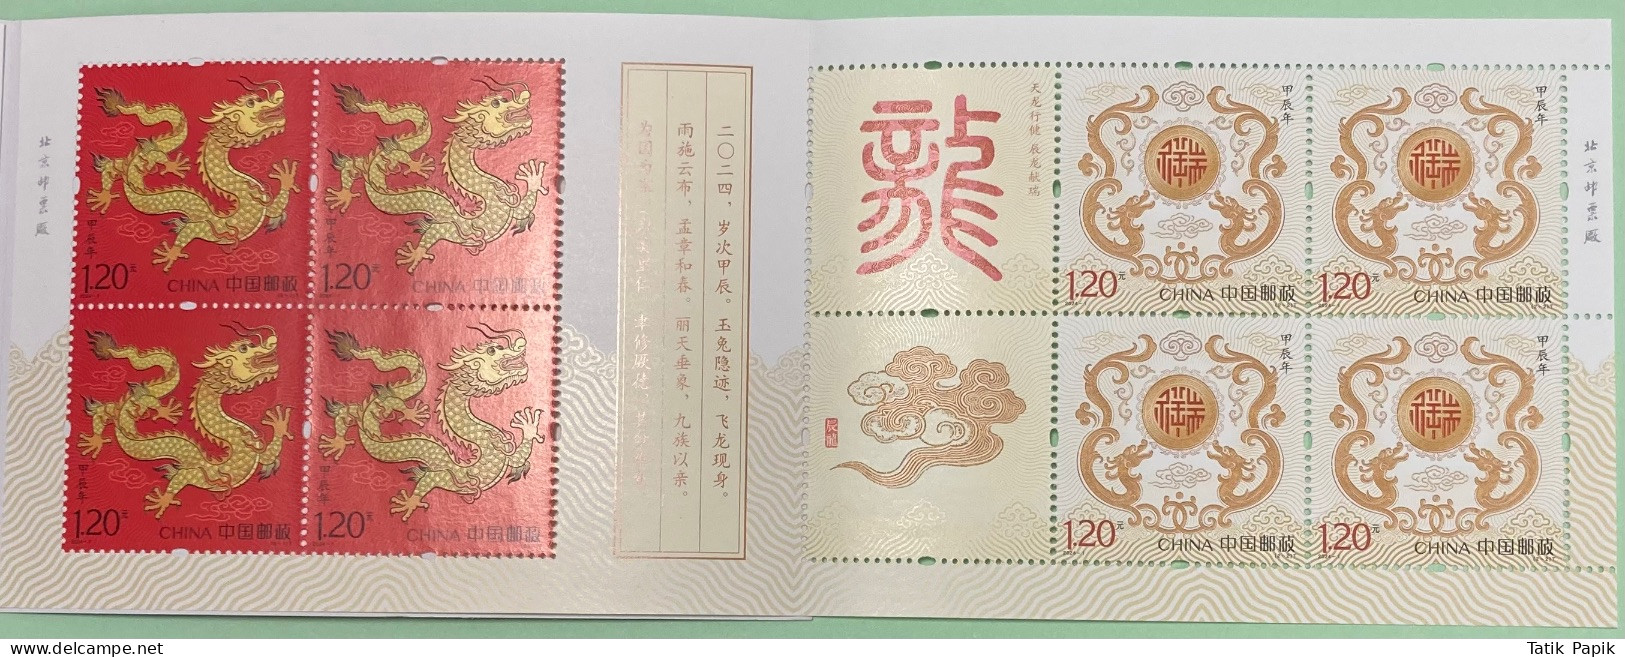 2024 Chine China Cina Booklet Année Lunaire Dragon Lunar New Year MNH Luxury Blister - Neufs